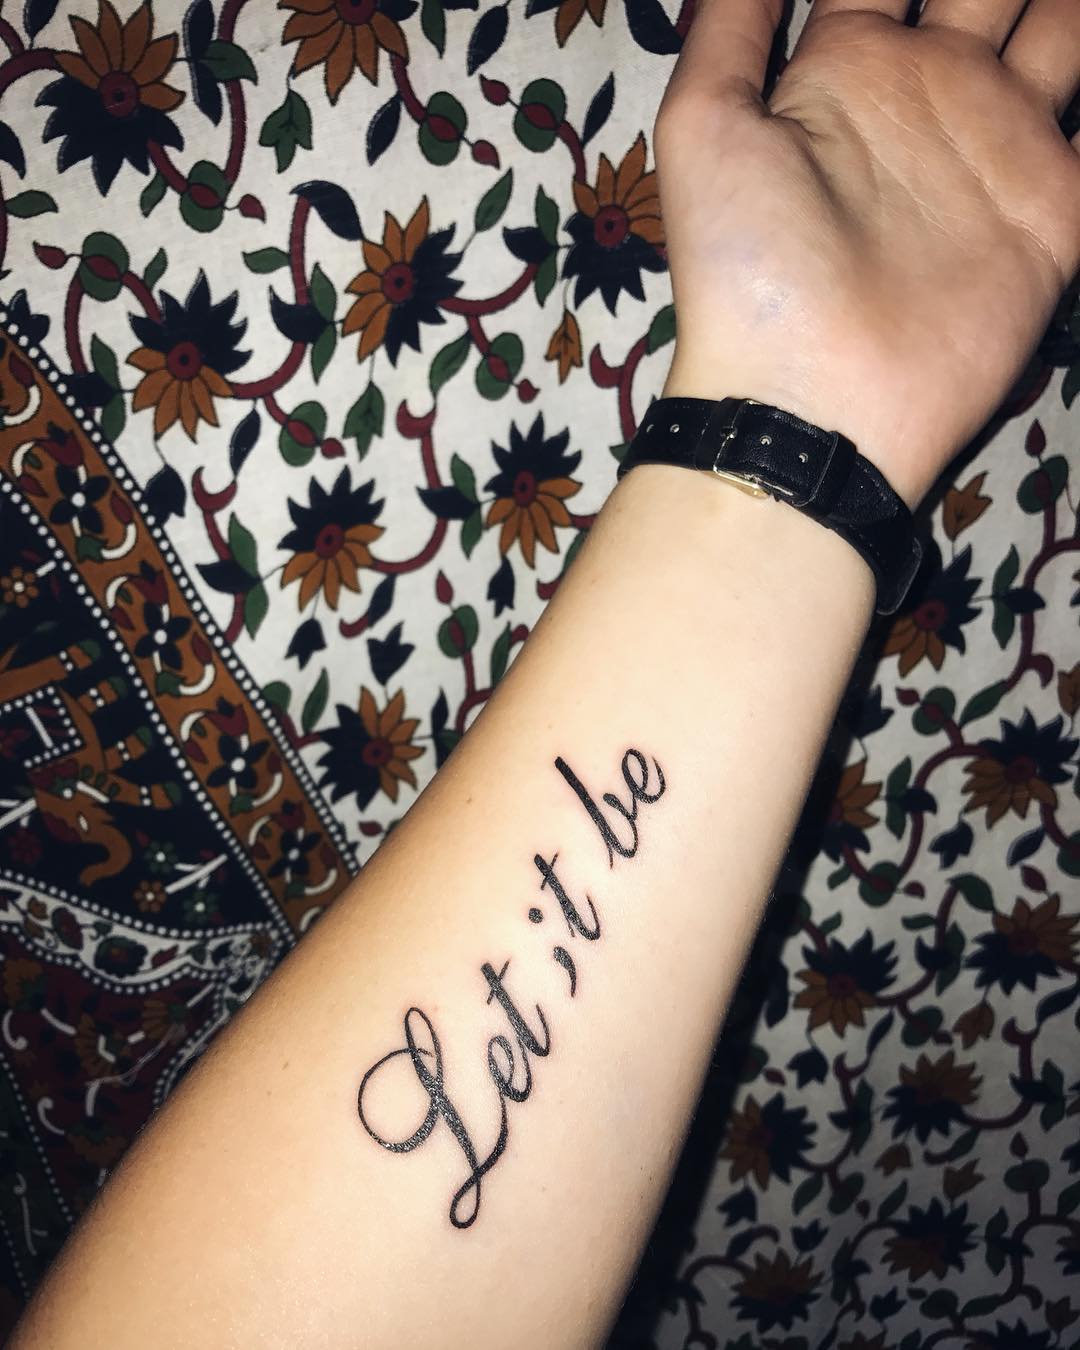 60+ Encouraging Semicolon Tattoo Ideas - Using Body Art to Give Hope